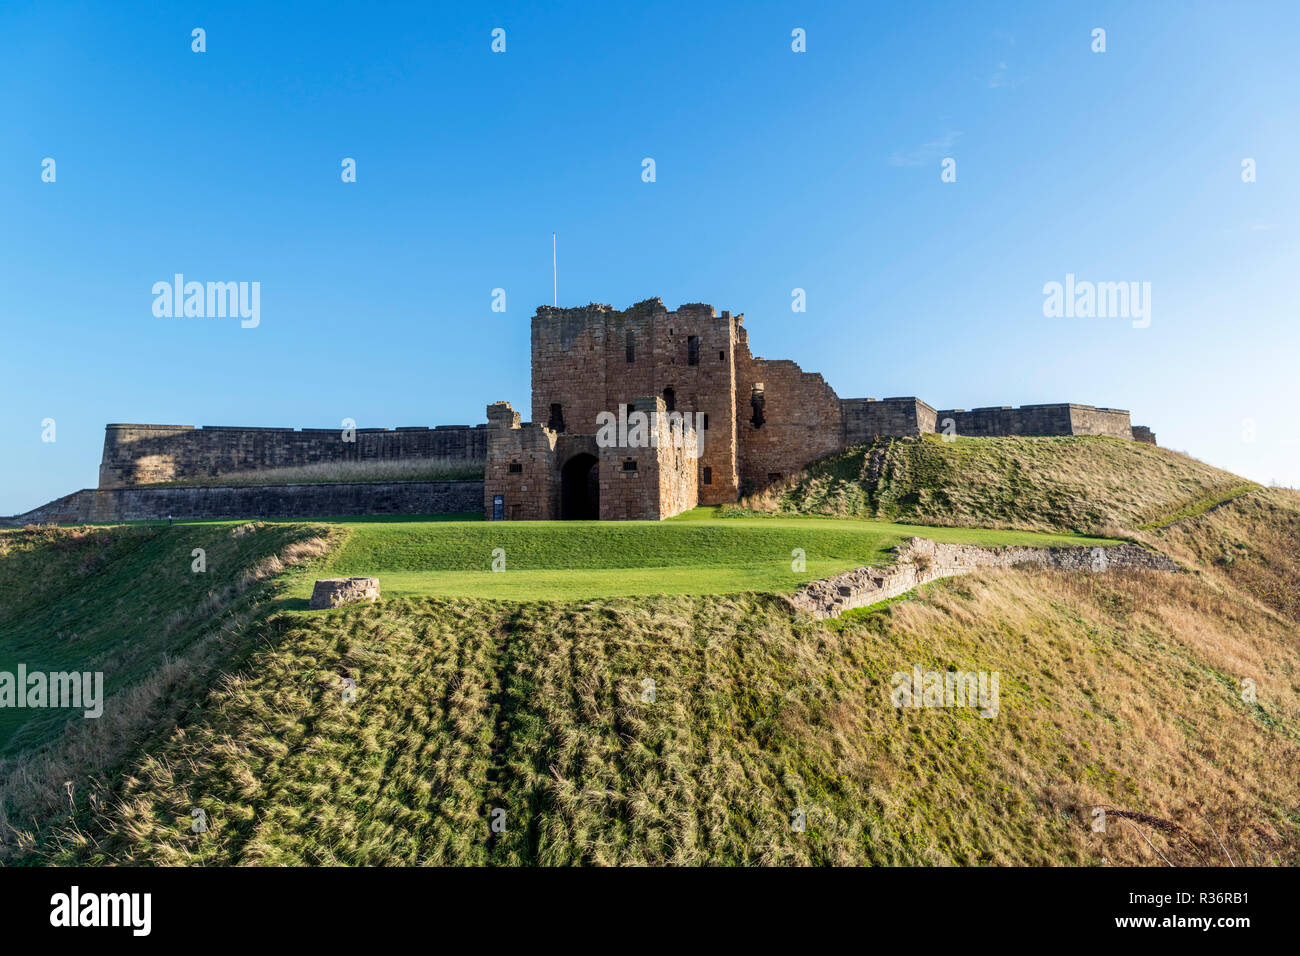 Tynemouth Castle, Tynemouth Castle and Priory, Tynemouth, Tyne and Wear, England UK Stock Photo